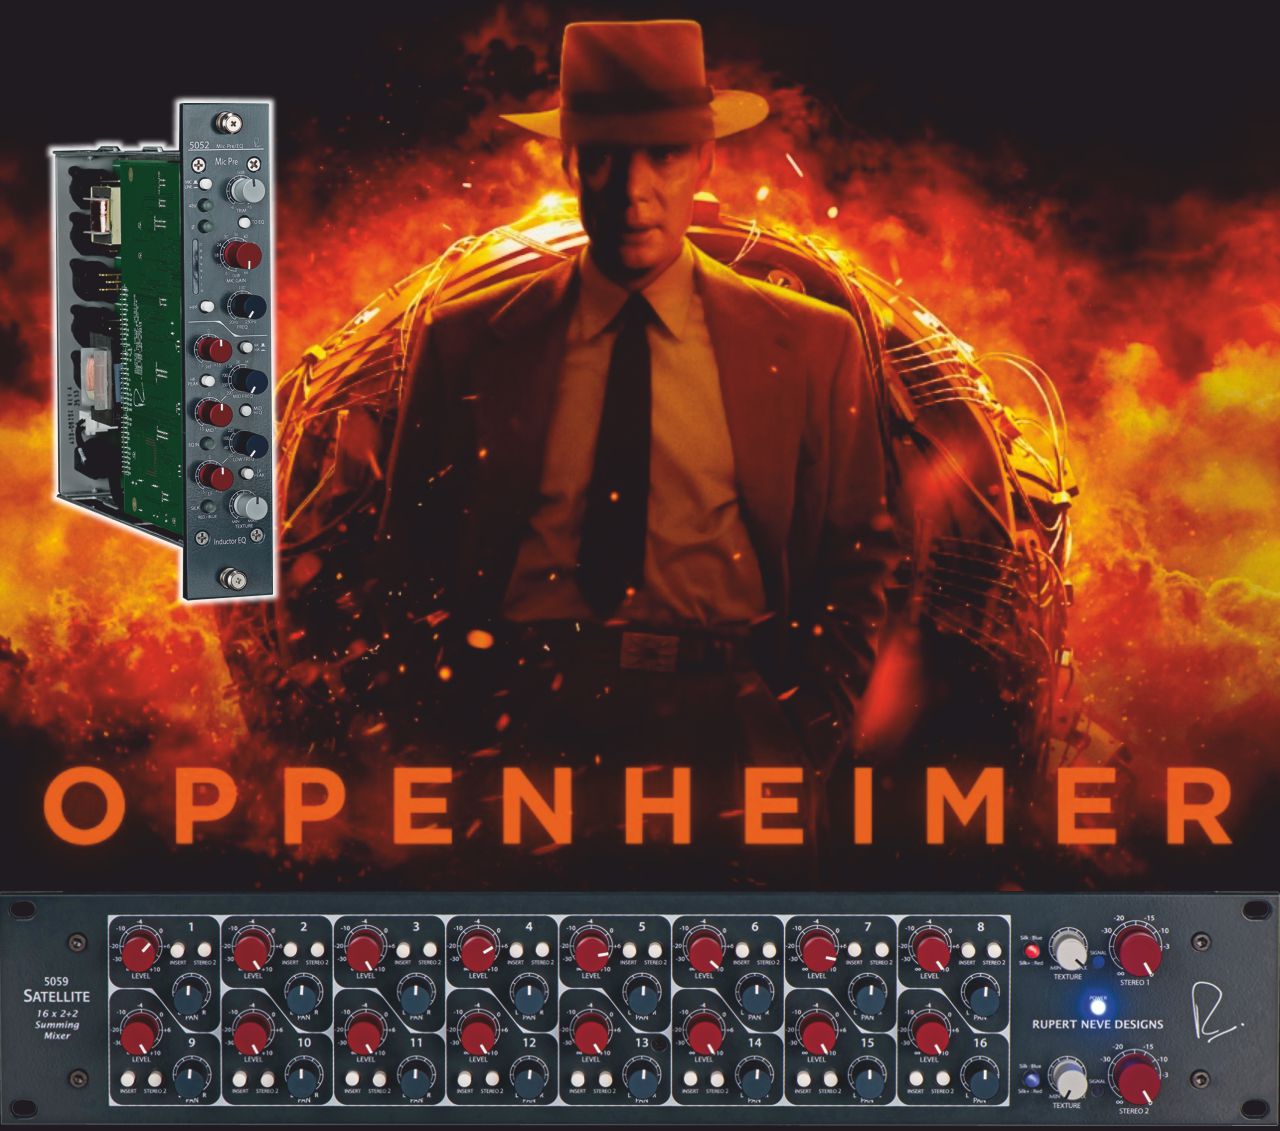 Oppenheimer wins the Oscar with the magic of Rupert Neve